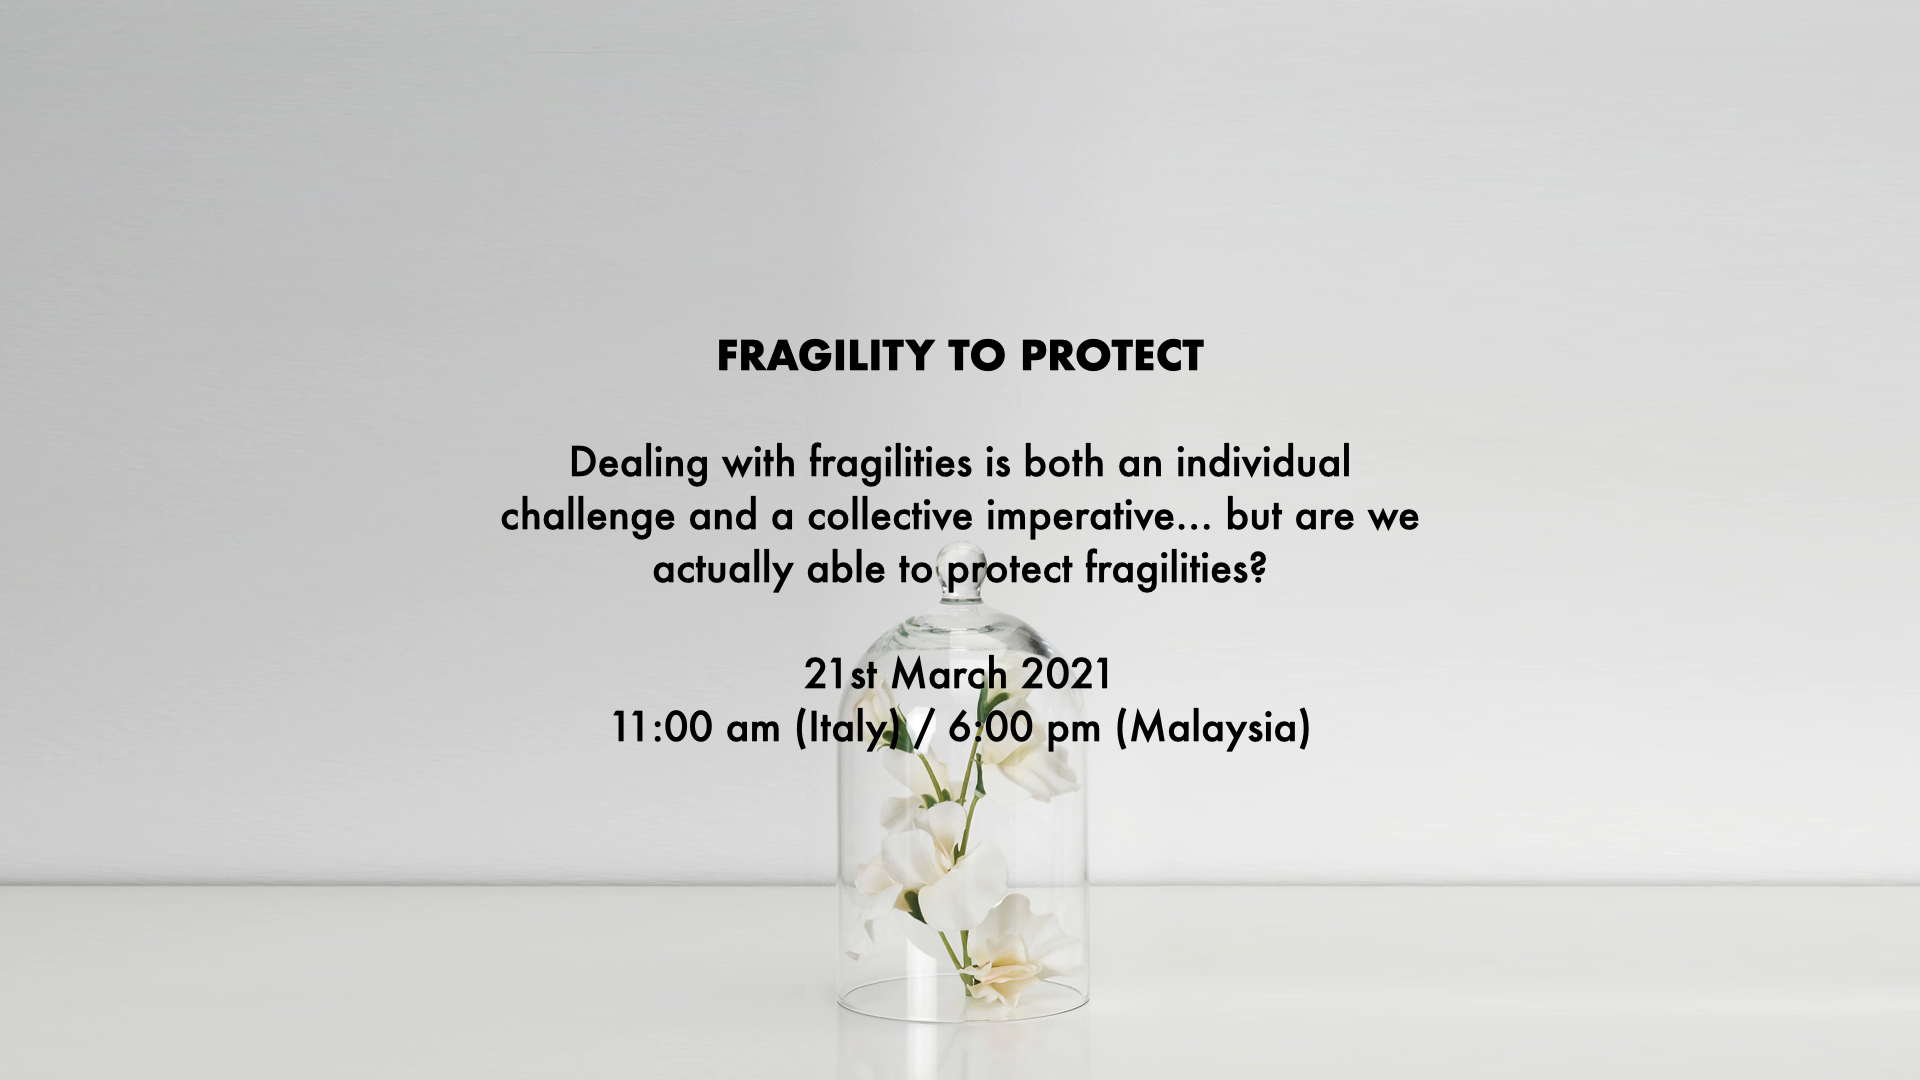 FRAGILITY TO PROTECT - A Students' Diary #4